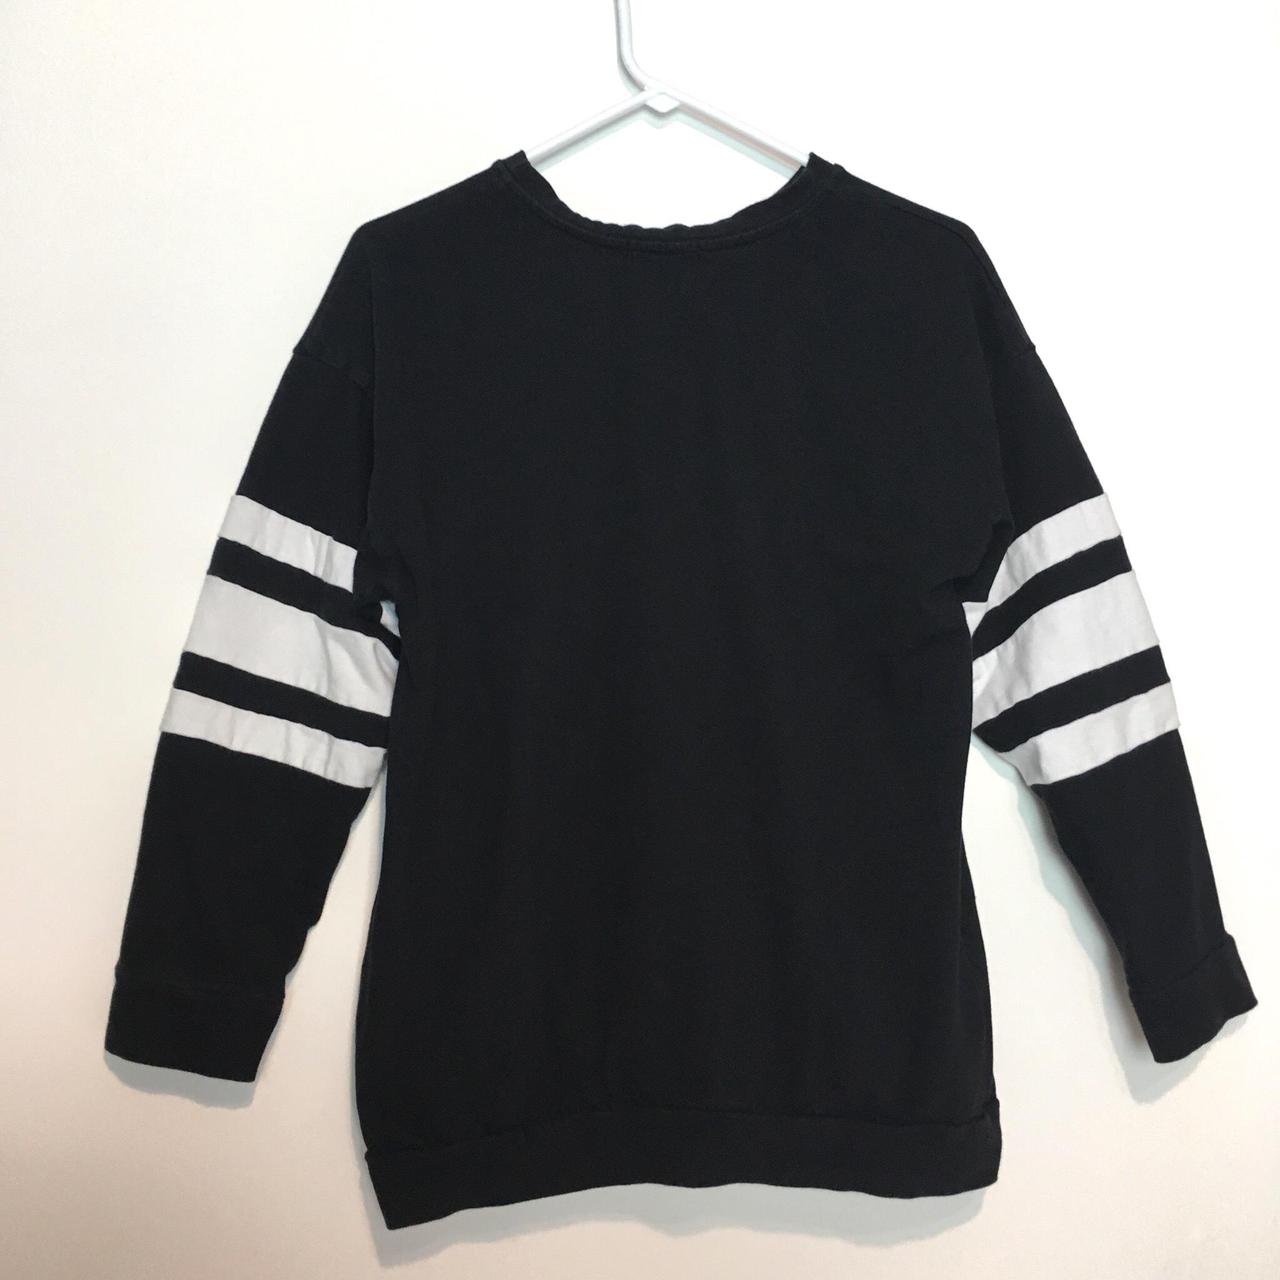 Product Image 3 - black sweat shirt 

this is